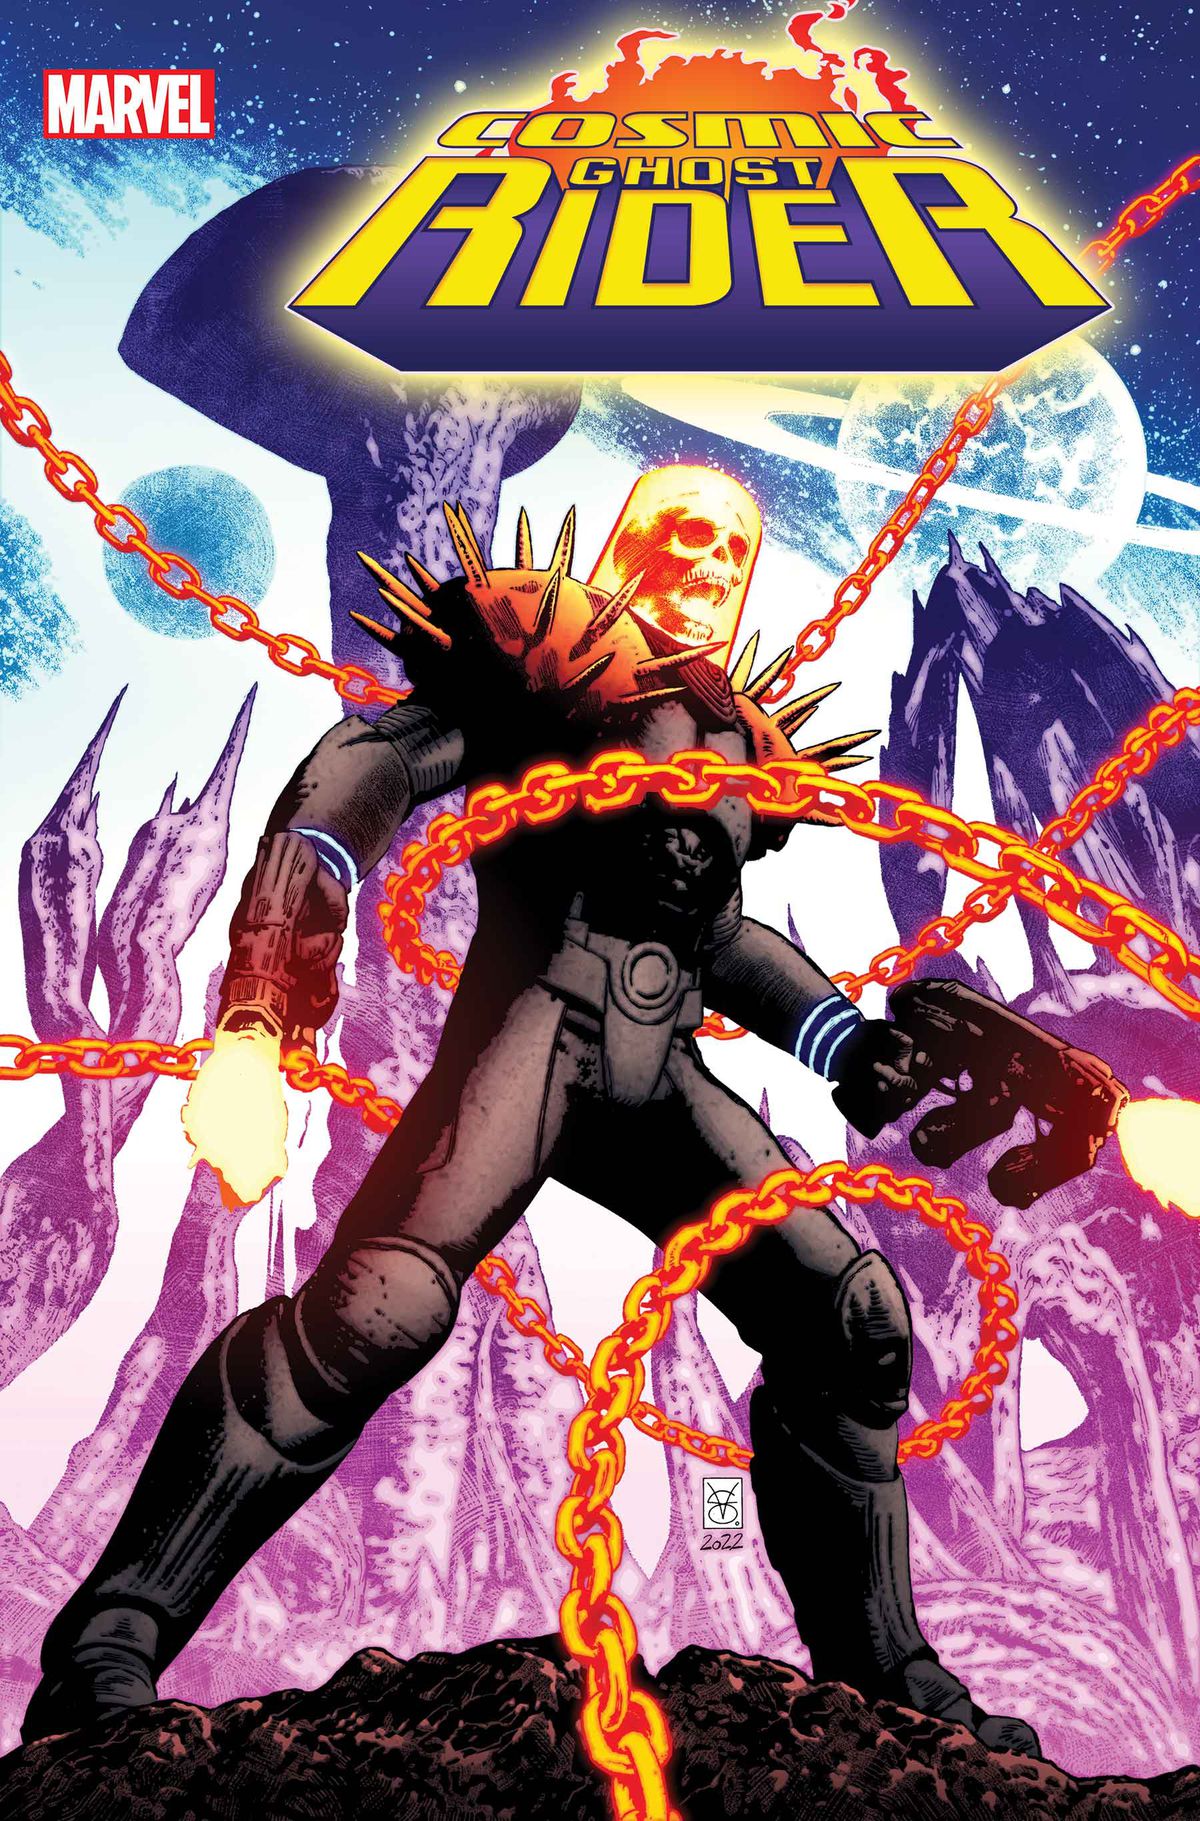 The Cosmic Ghost Rider fires his guns while chains envelop him on the cover of Cosmic Ghost Rider #1 (2023).